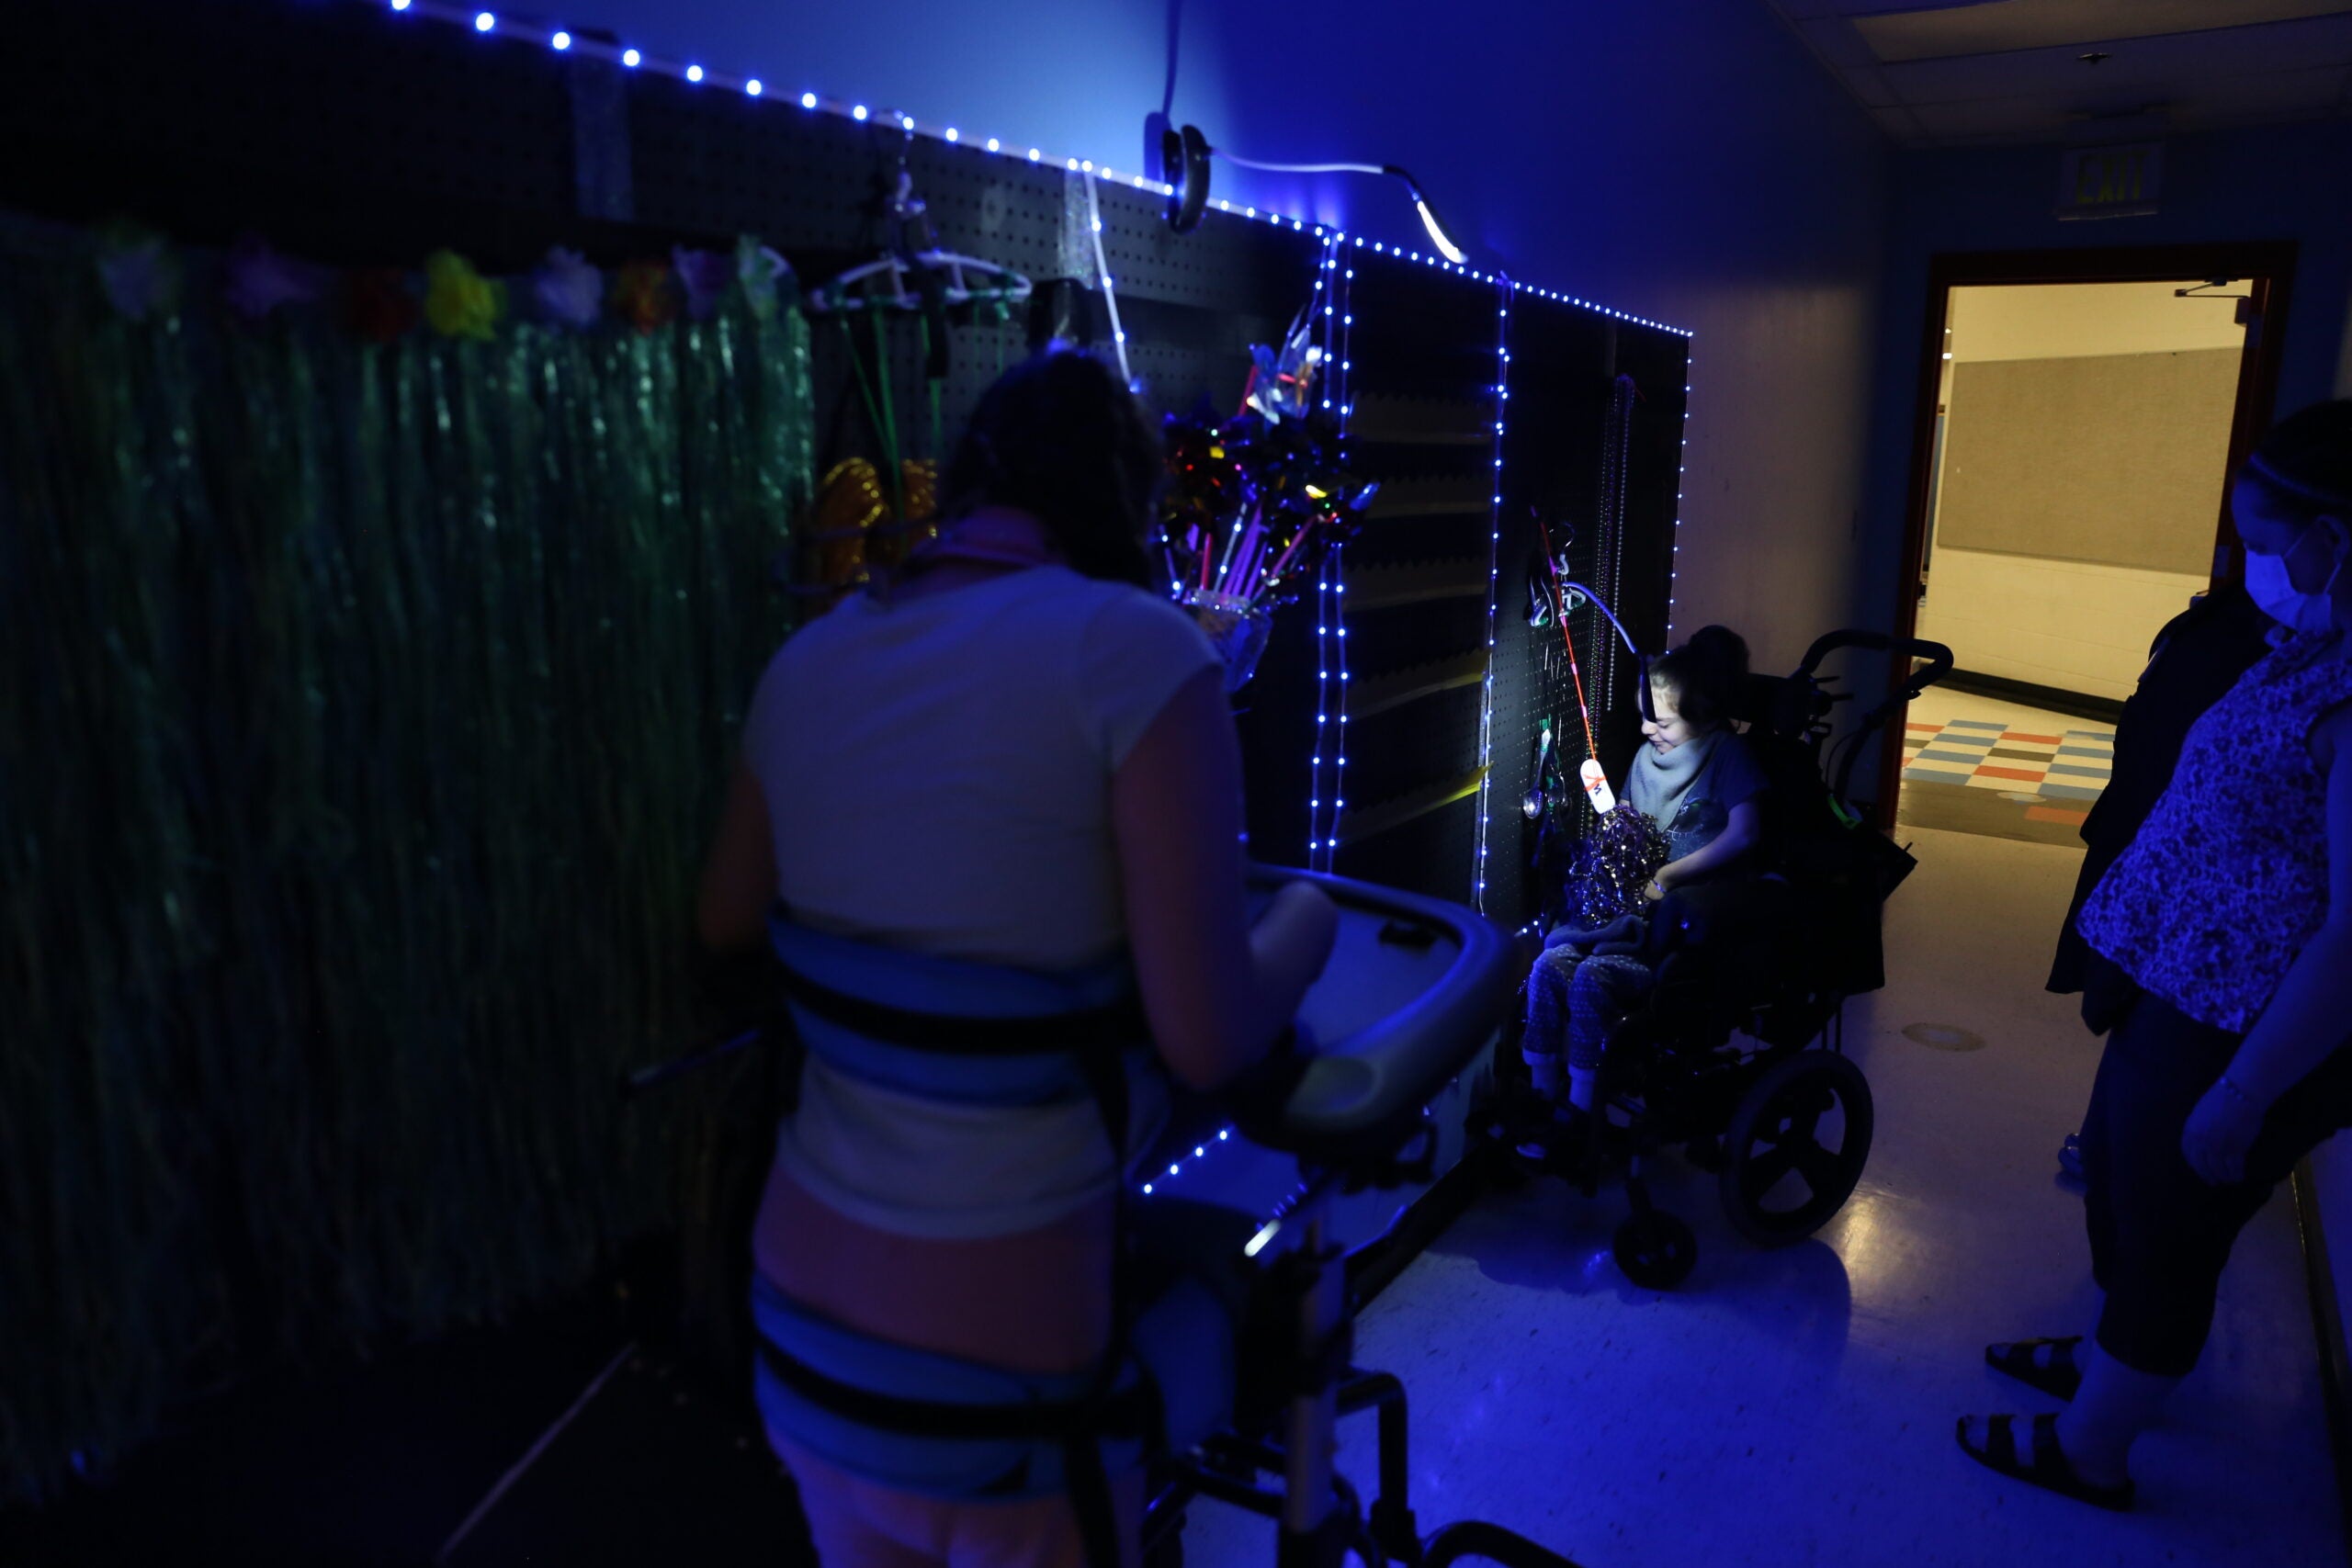 Student play in front of blue lighted sensory wall.